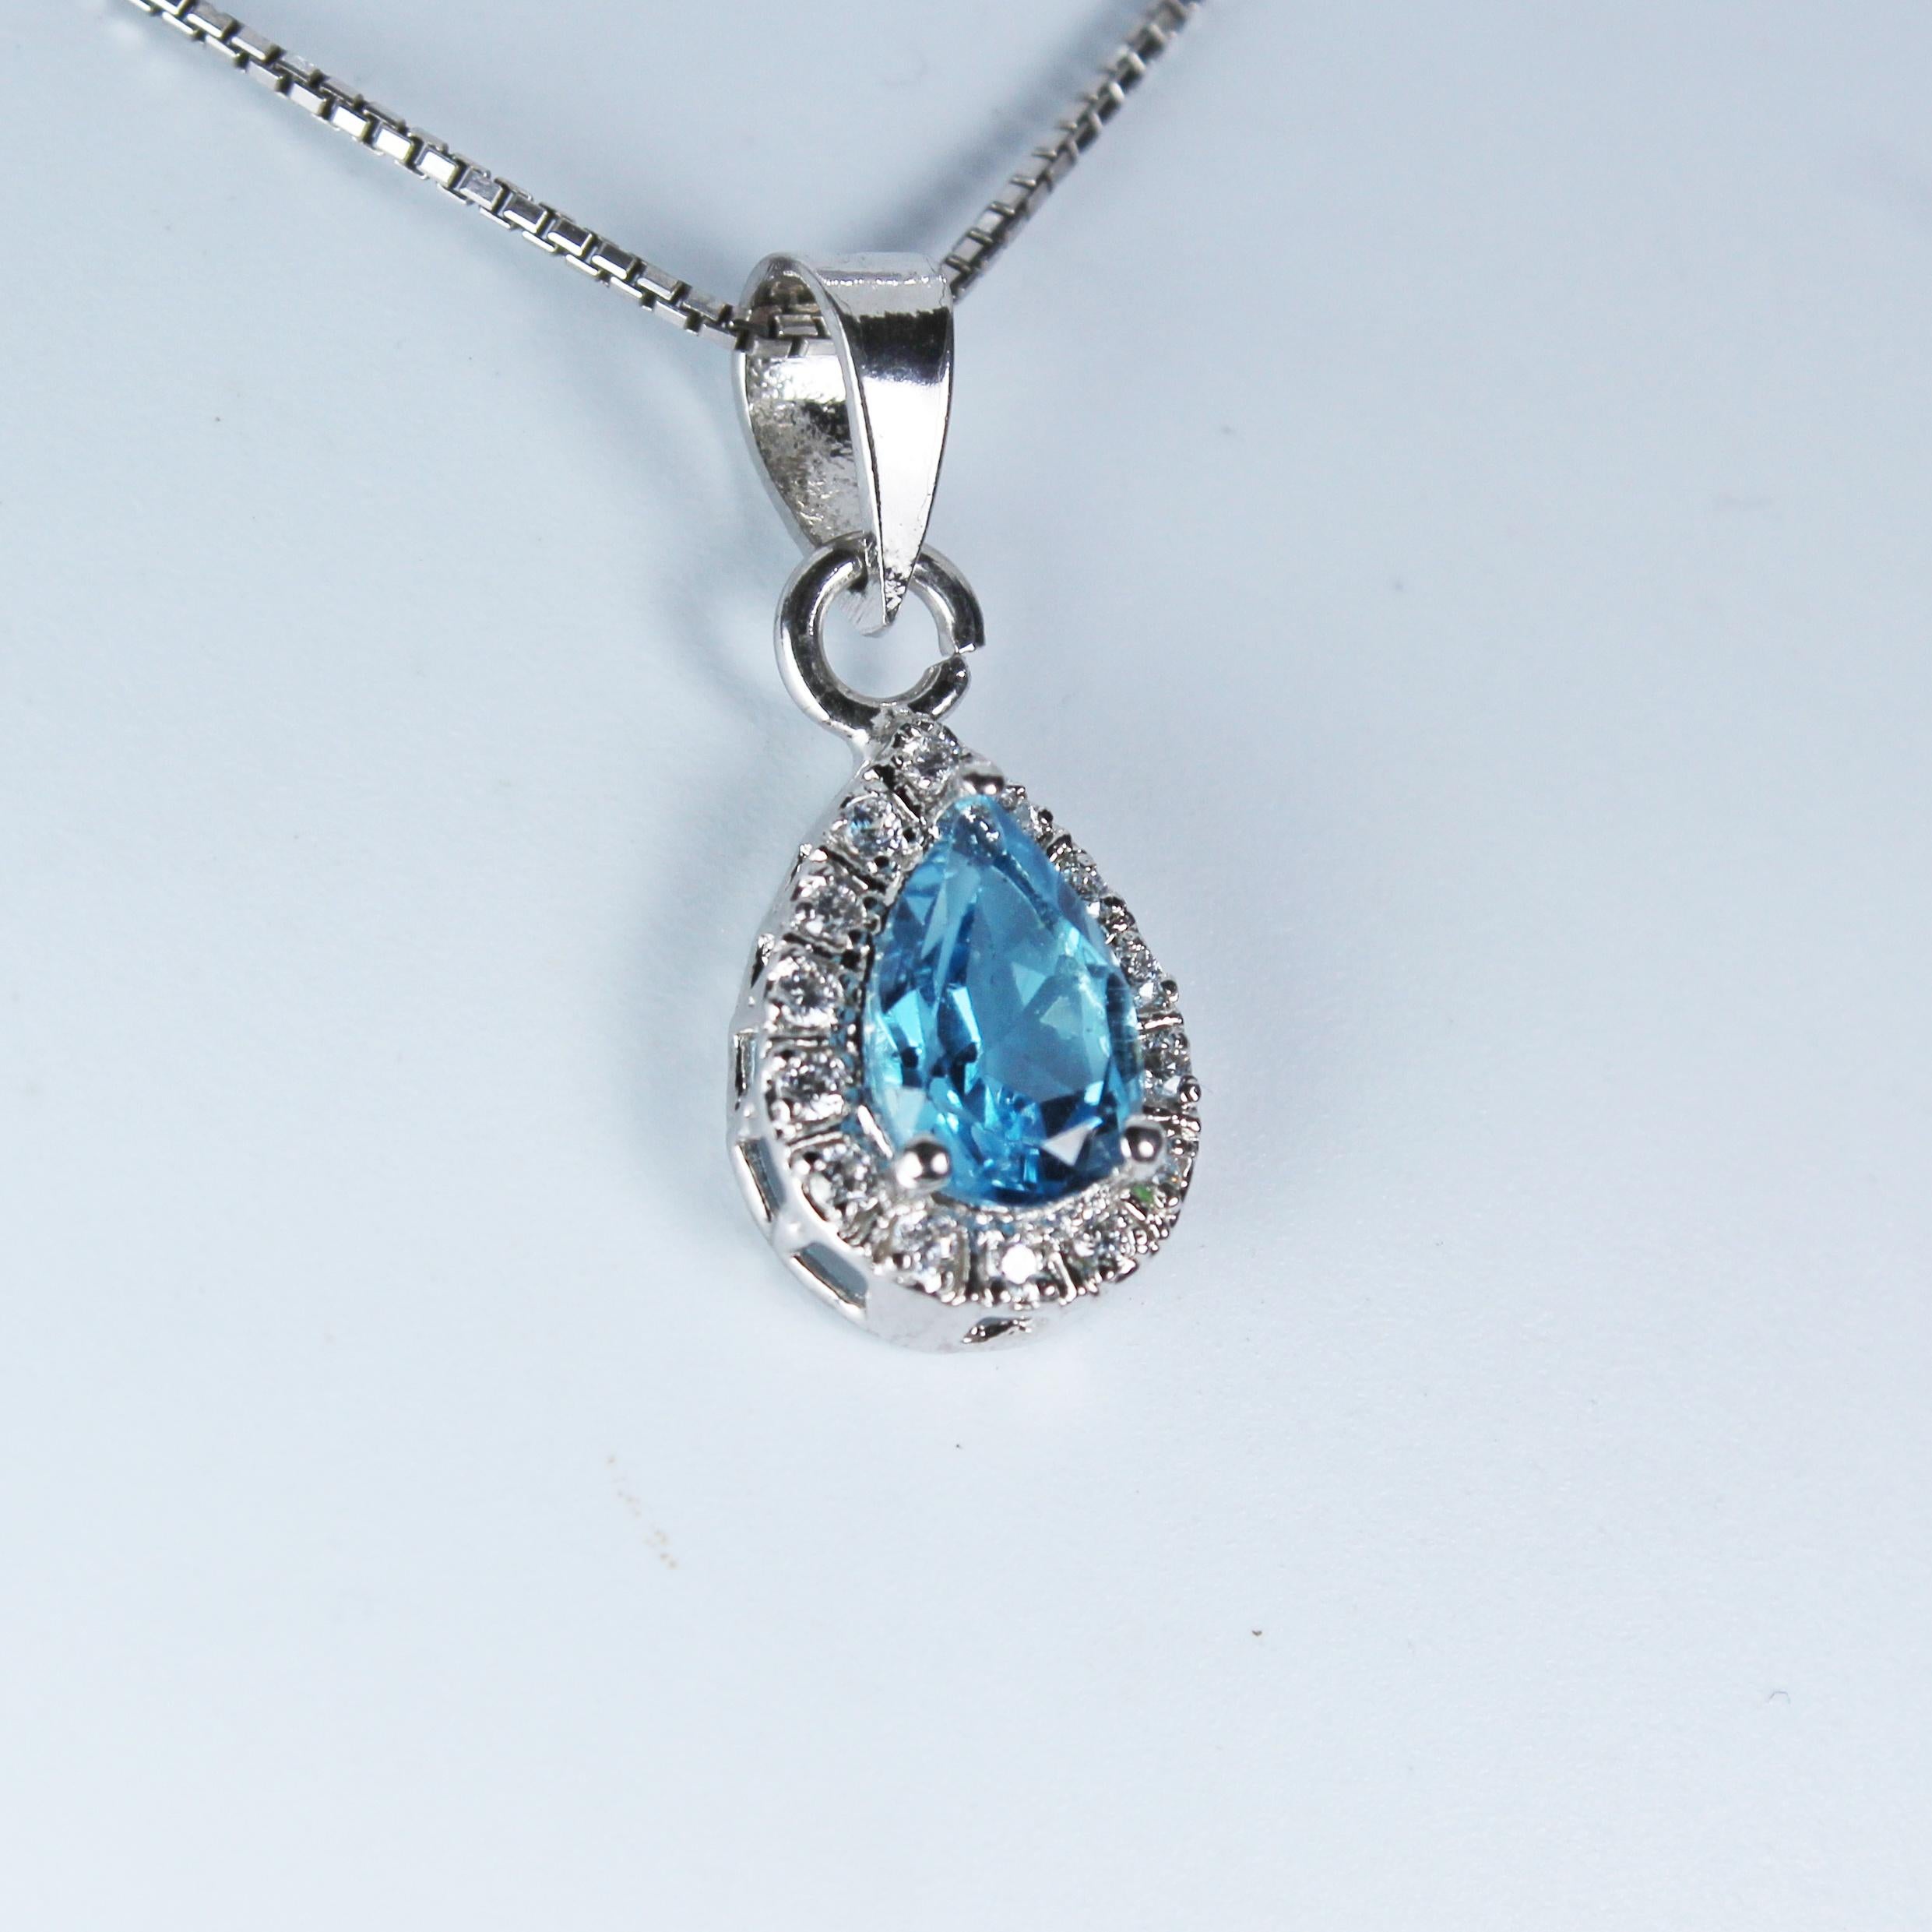 Product Details:

Metal of pendant - Sterling Silver
Diamonds - synthetic
Pendant size (without bail) - 13 x 9 mm
Pendant gross Weight - 1.68 Grams
Gemstone - Blue Topaz
Stone weight - 0.50 Carat
Stone shape - Pear
Stone size - 9 x 5 mm

Timeless